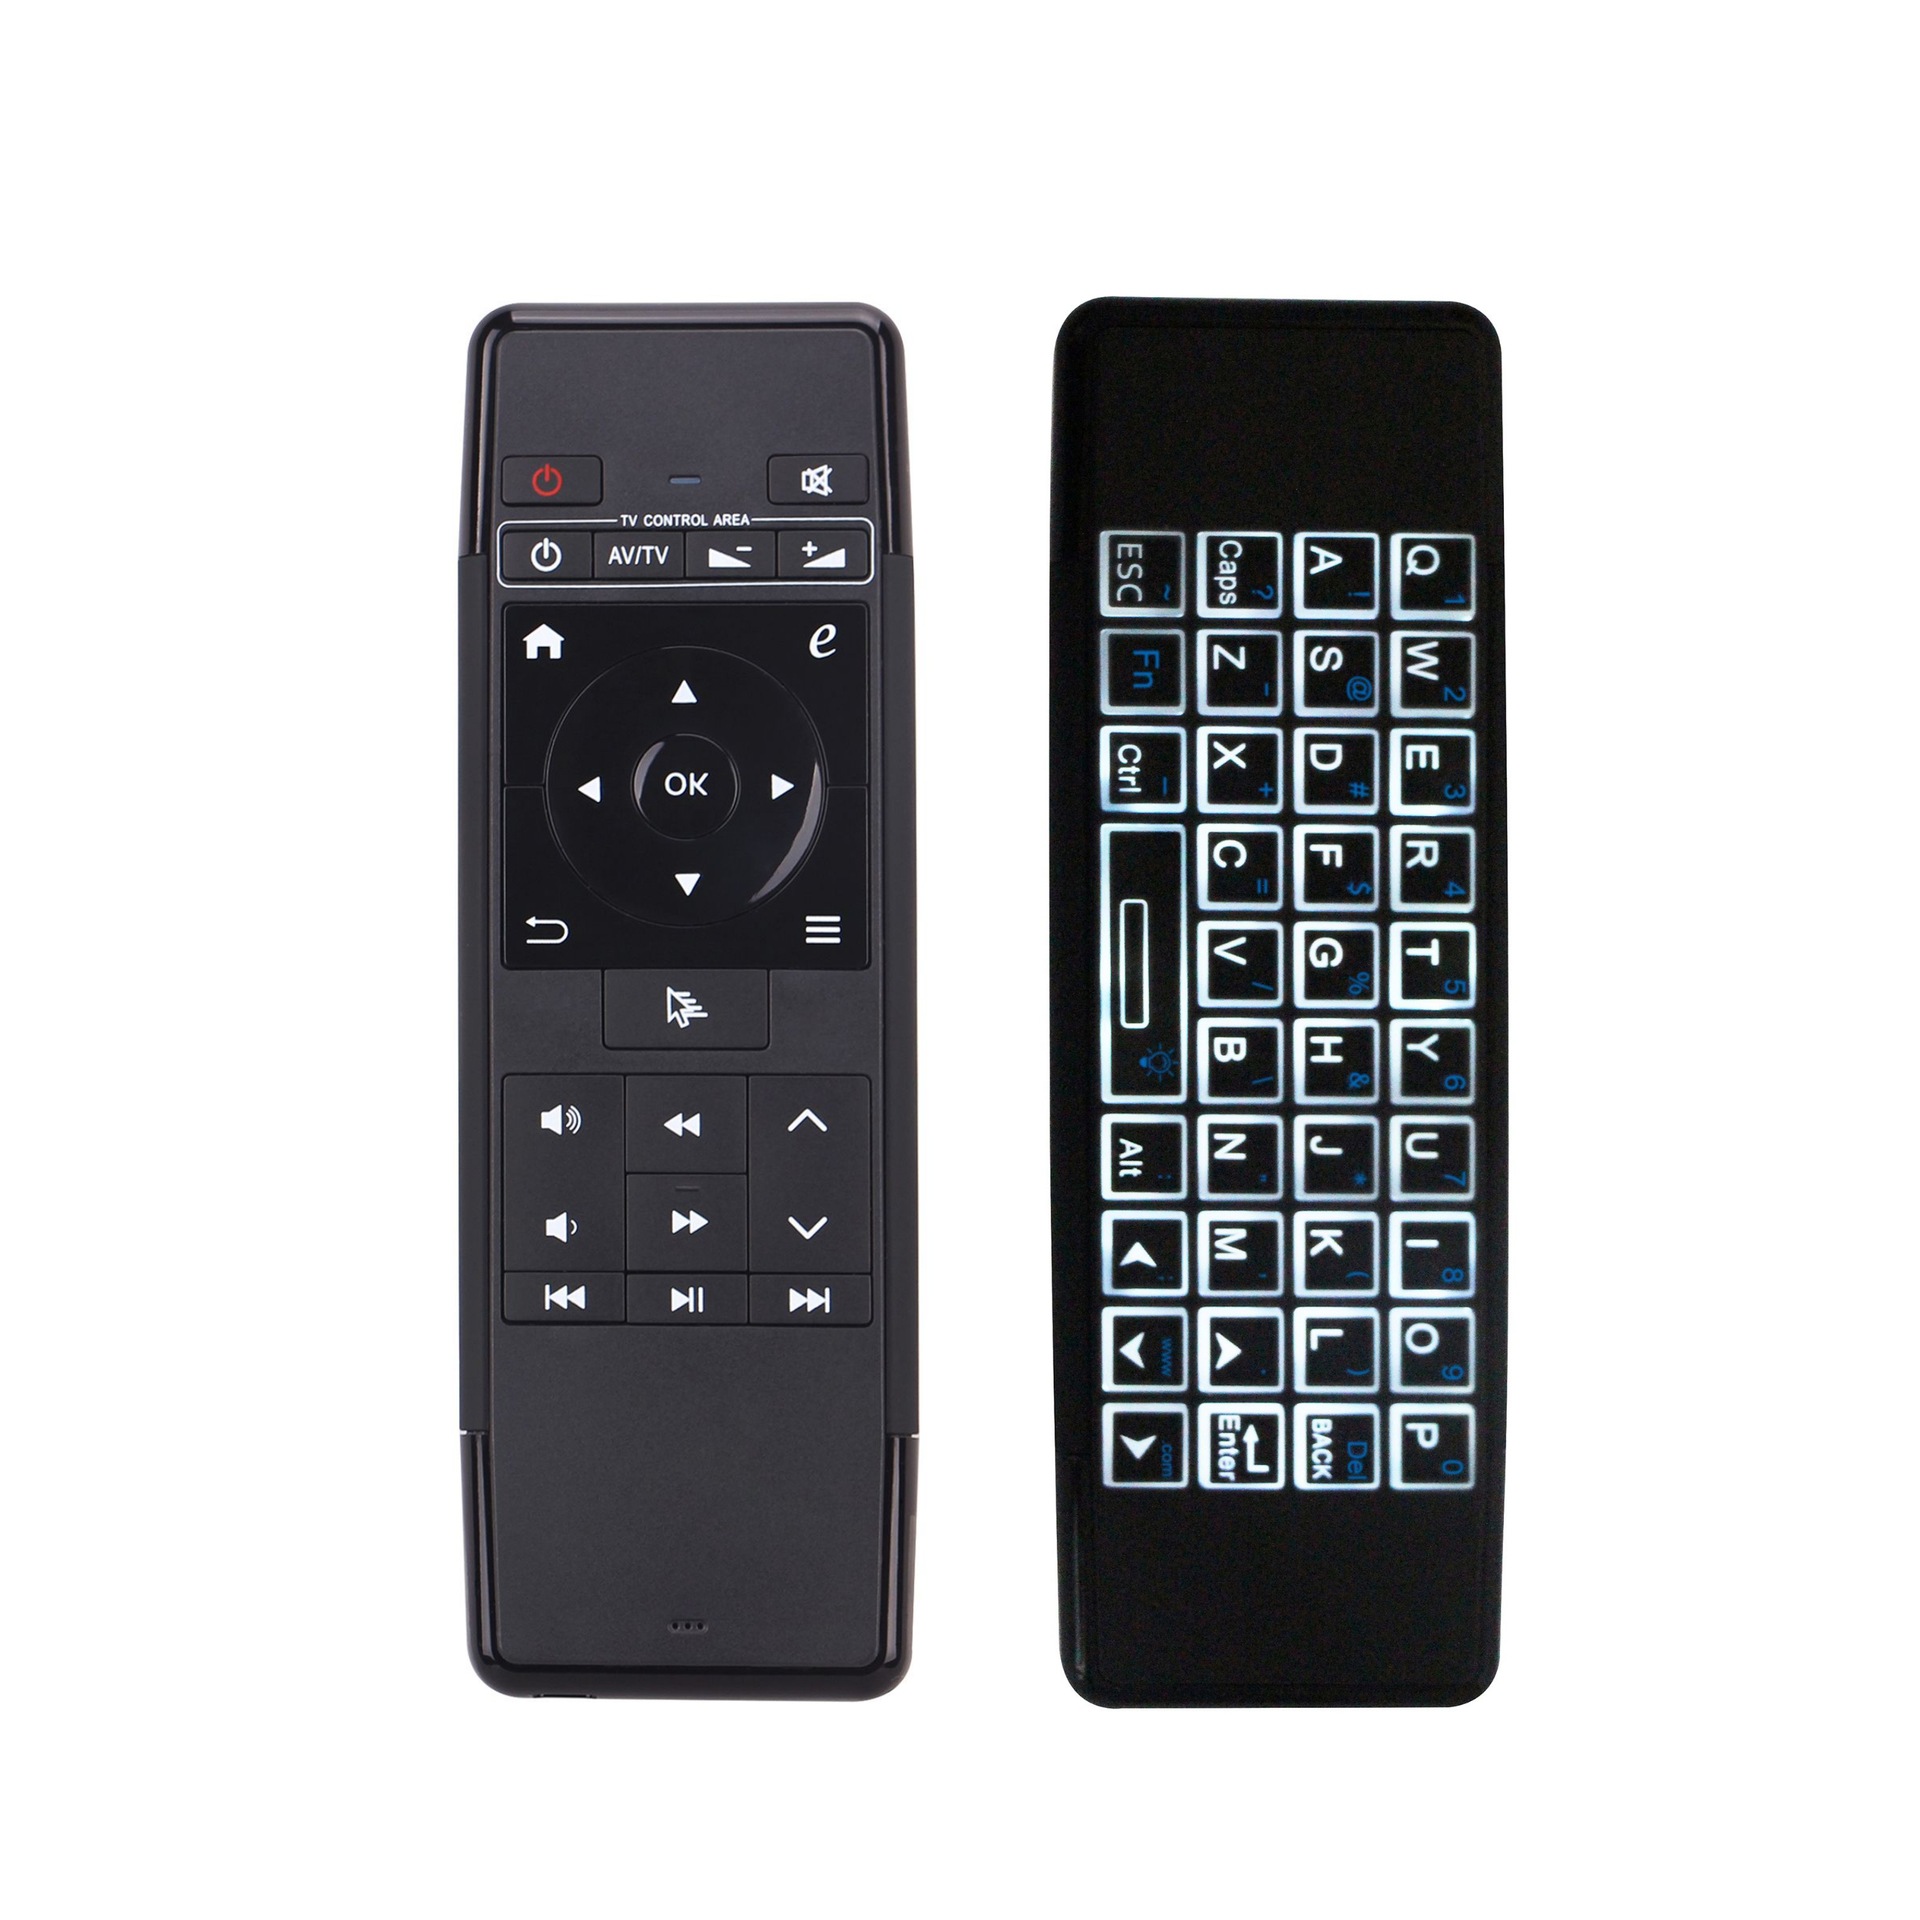 

Double-Sided Wireless 2.4GHz Air Mouse Mini Keyboard Voice Remote Control For Box HTPC Pc Android TV Project Mini Pc Smart TV